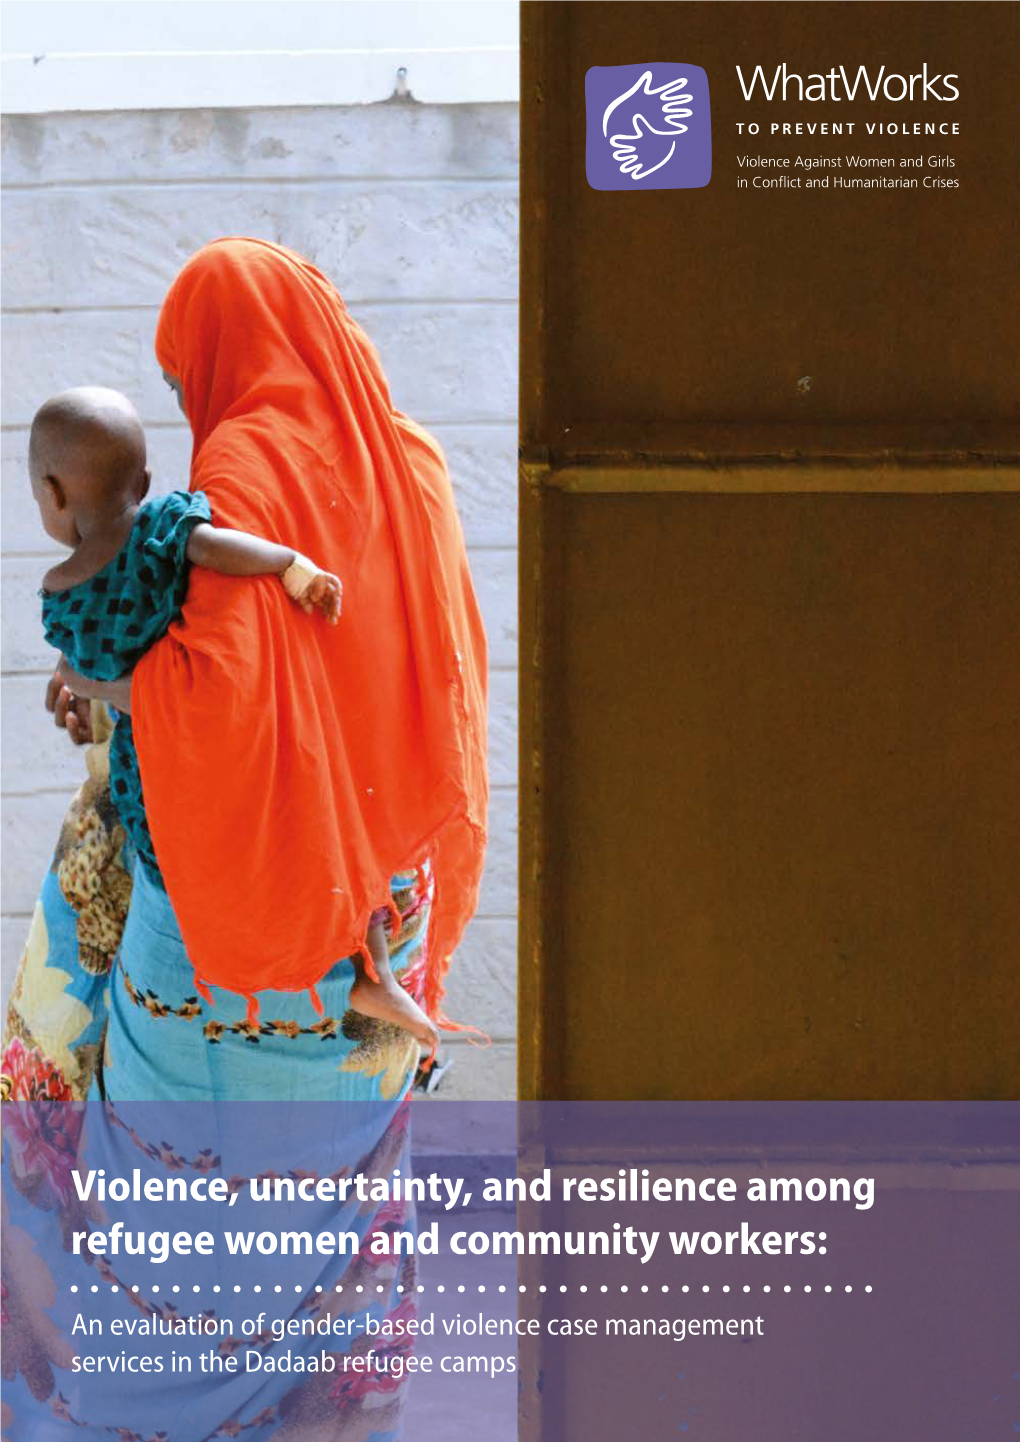 Violence, Uncertainty, and Resilience Among Refugee Women and Community Workers